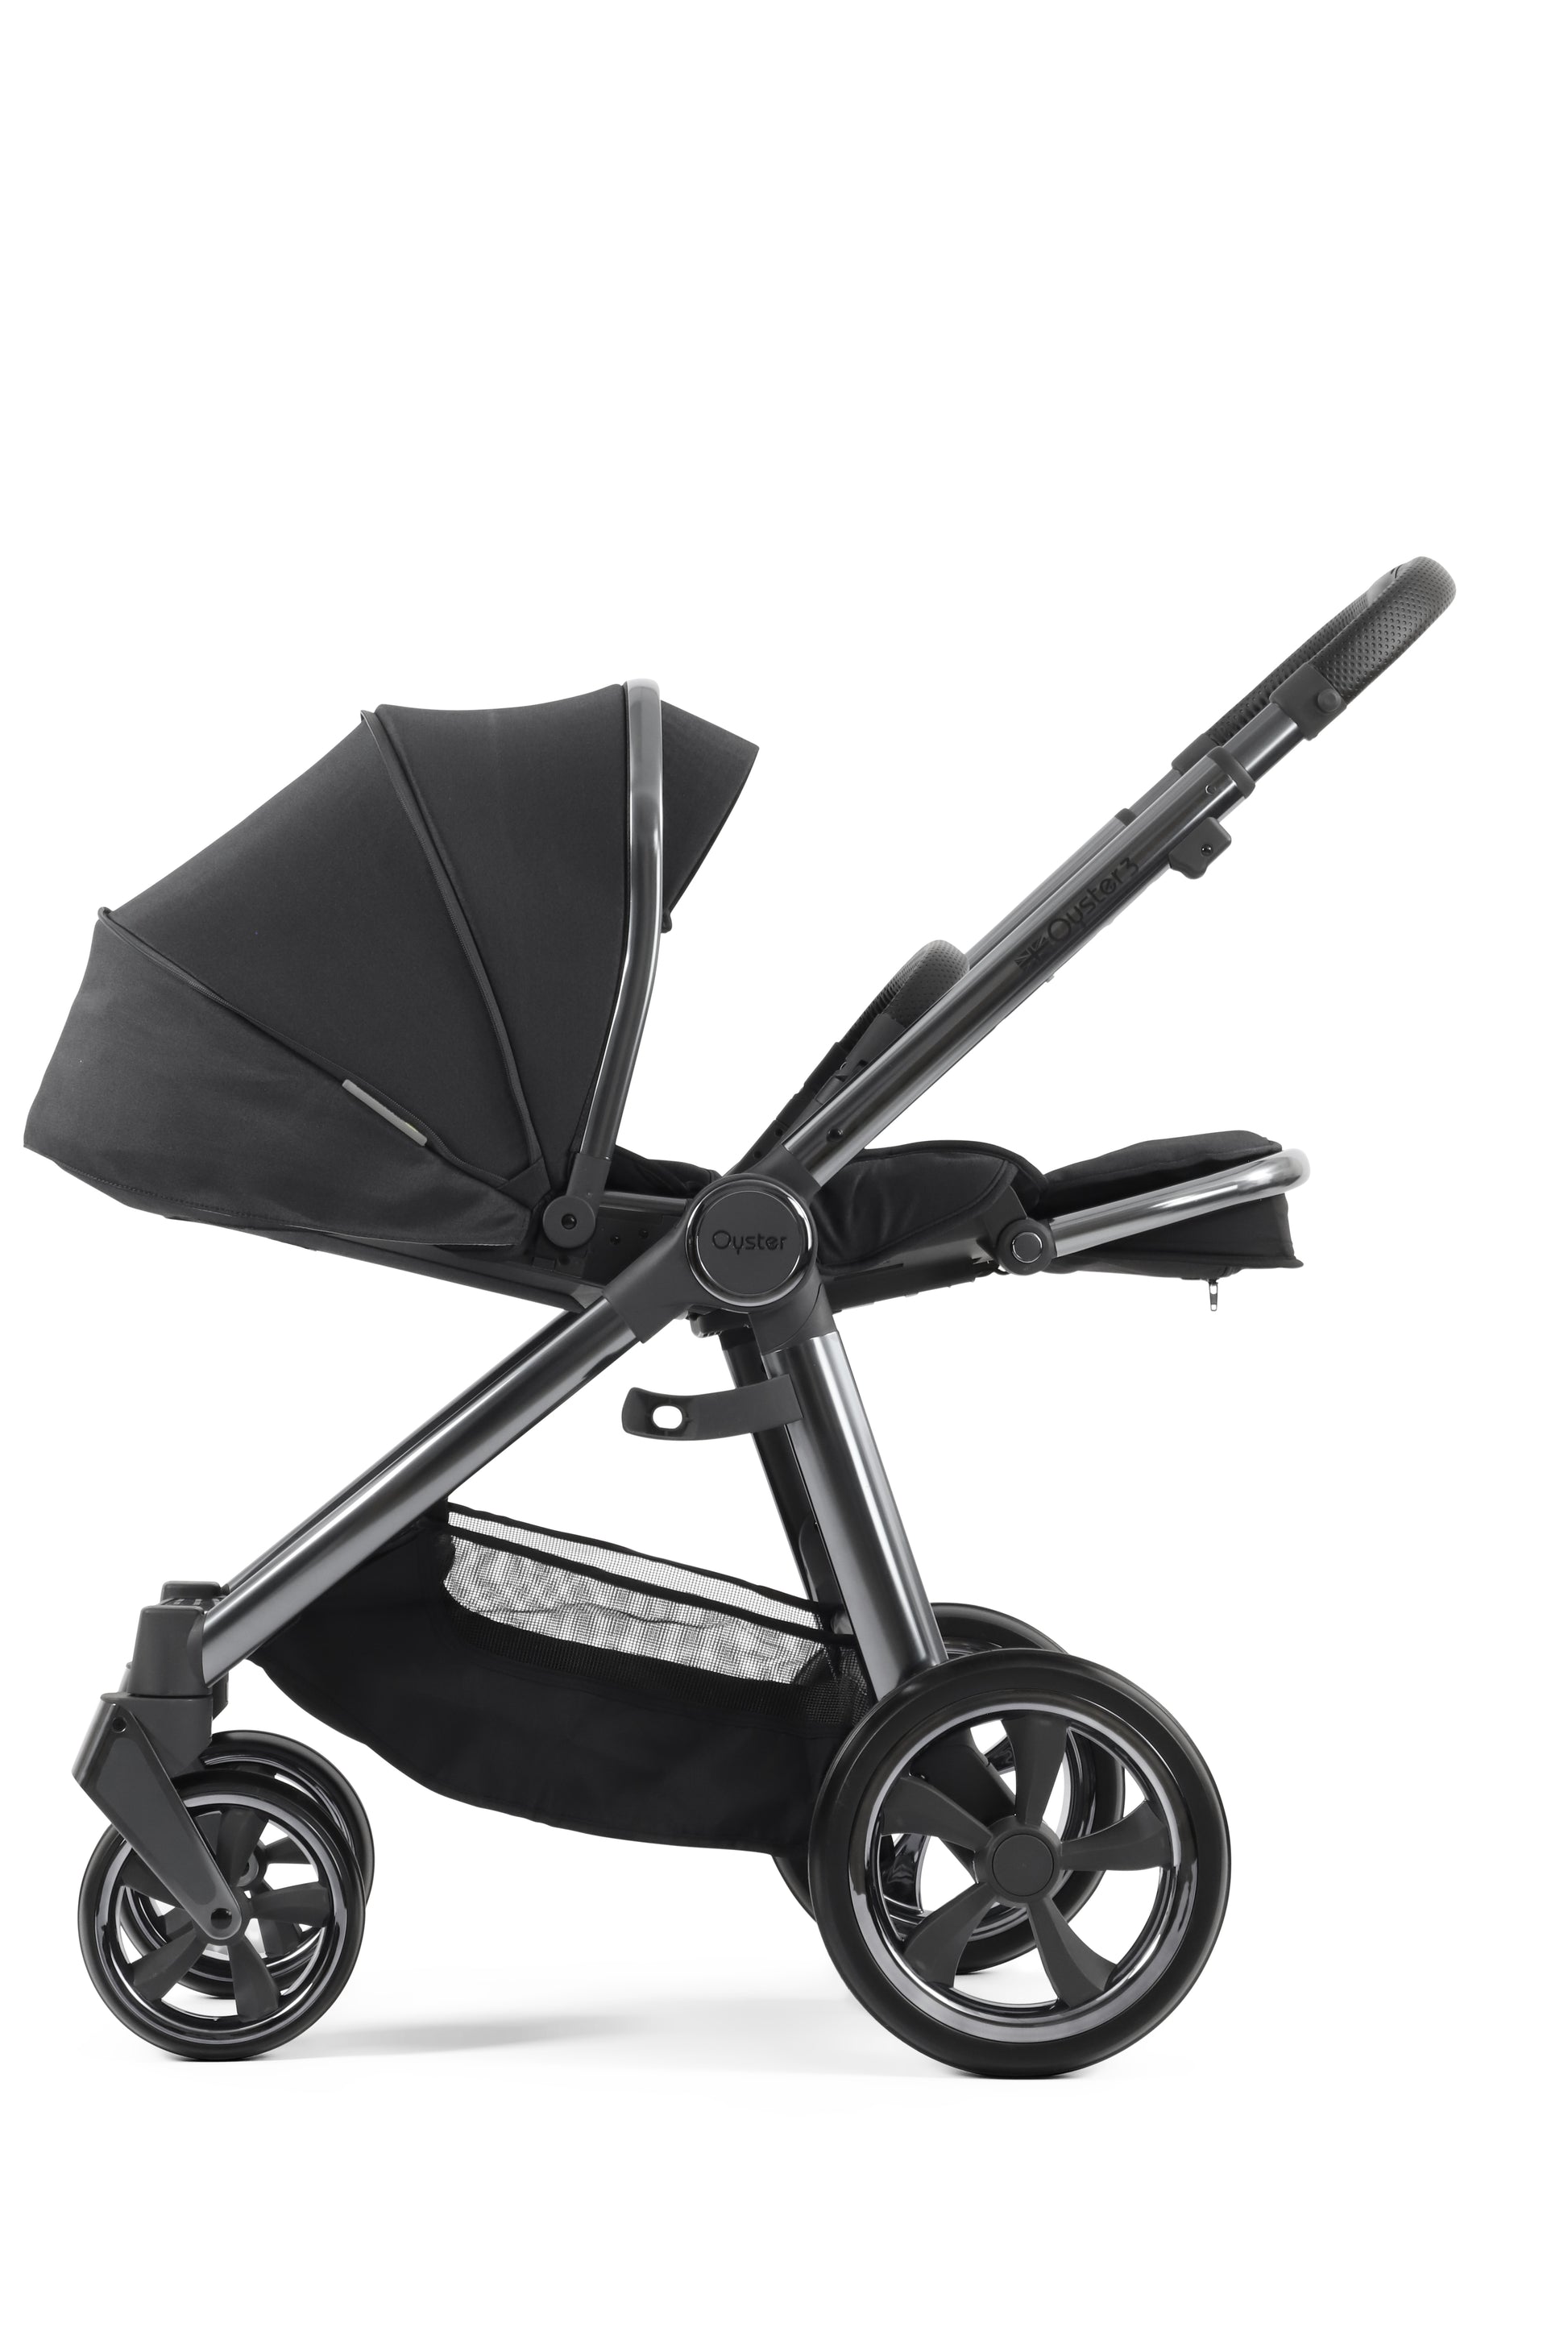 Oyster 3 Pushchair | Carbonite (Gun Metal Chassis)